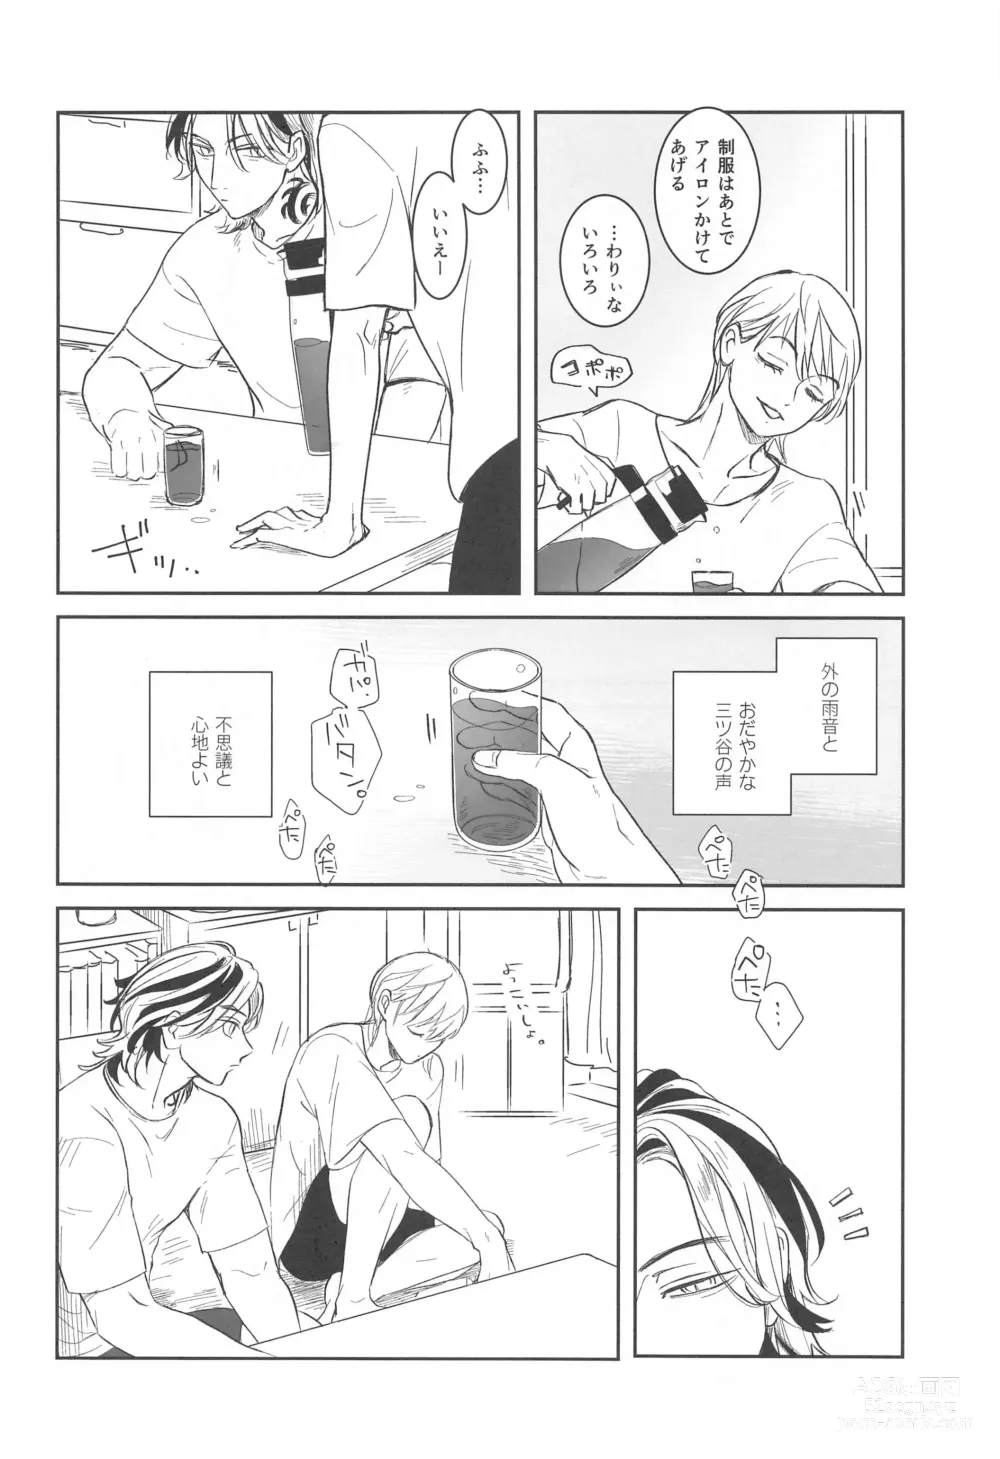 Page 19 of doujinshi Houkago Lesson